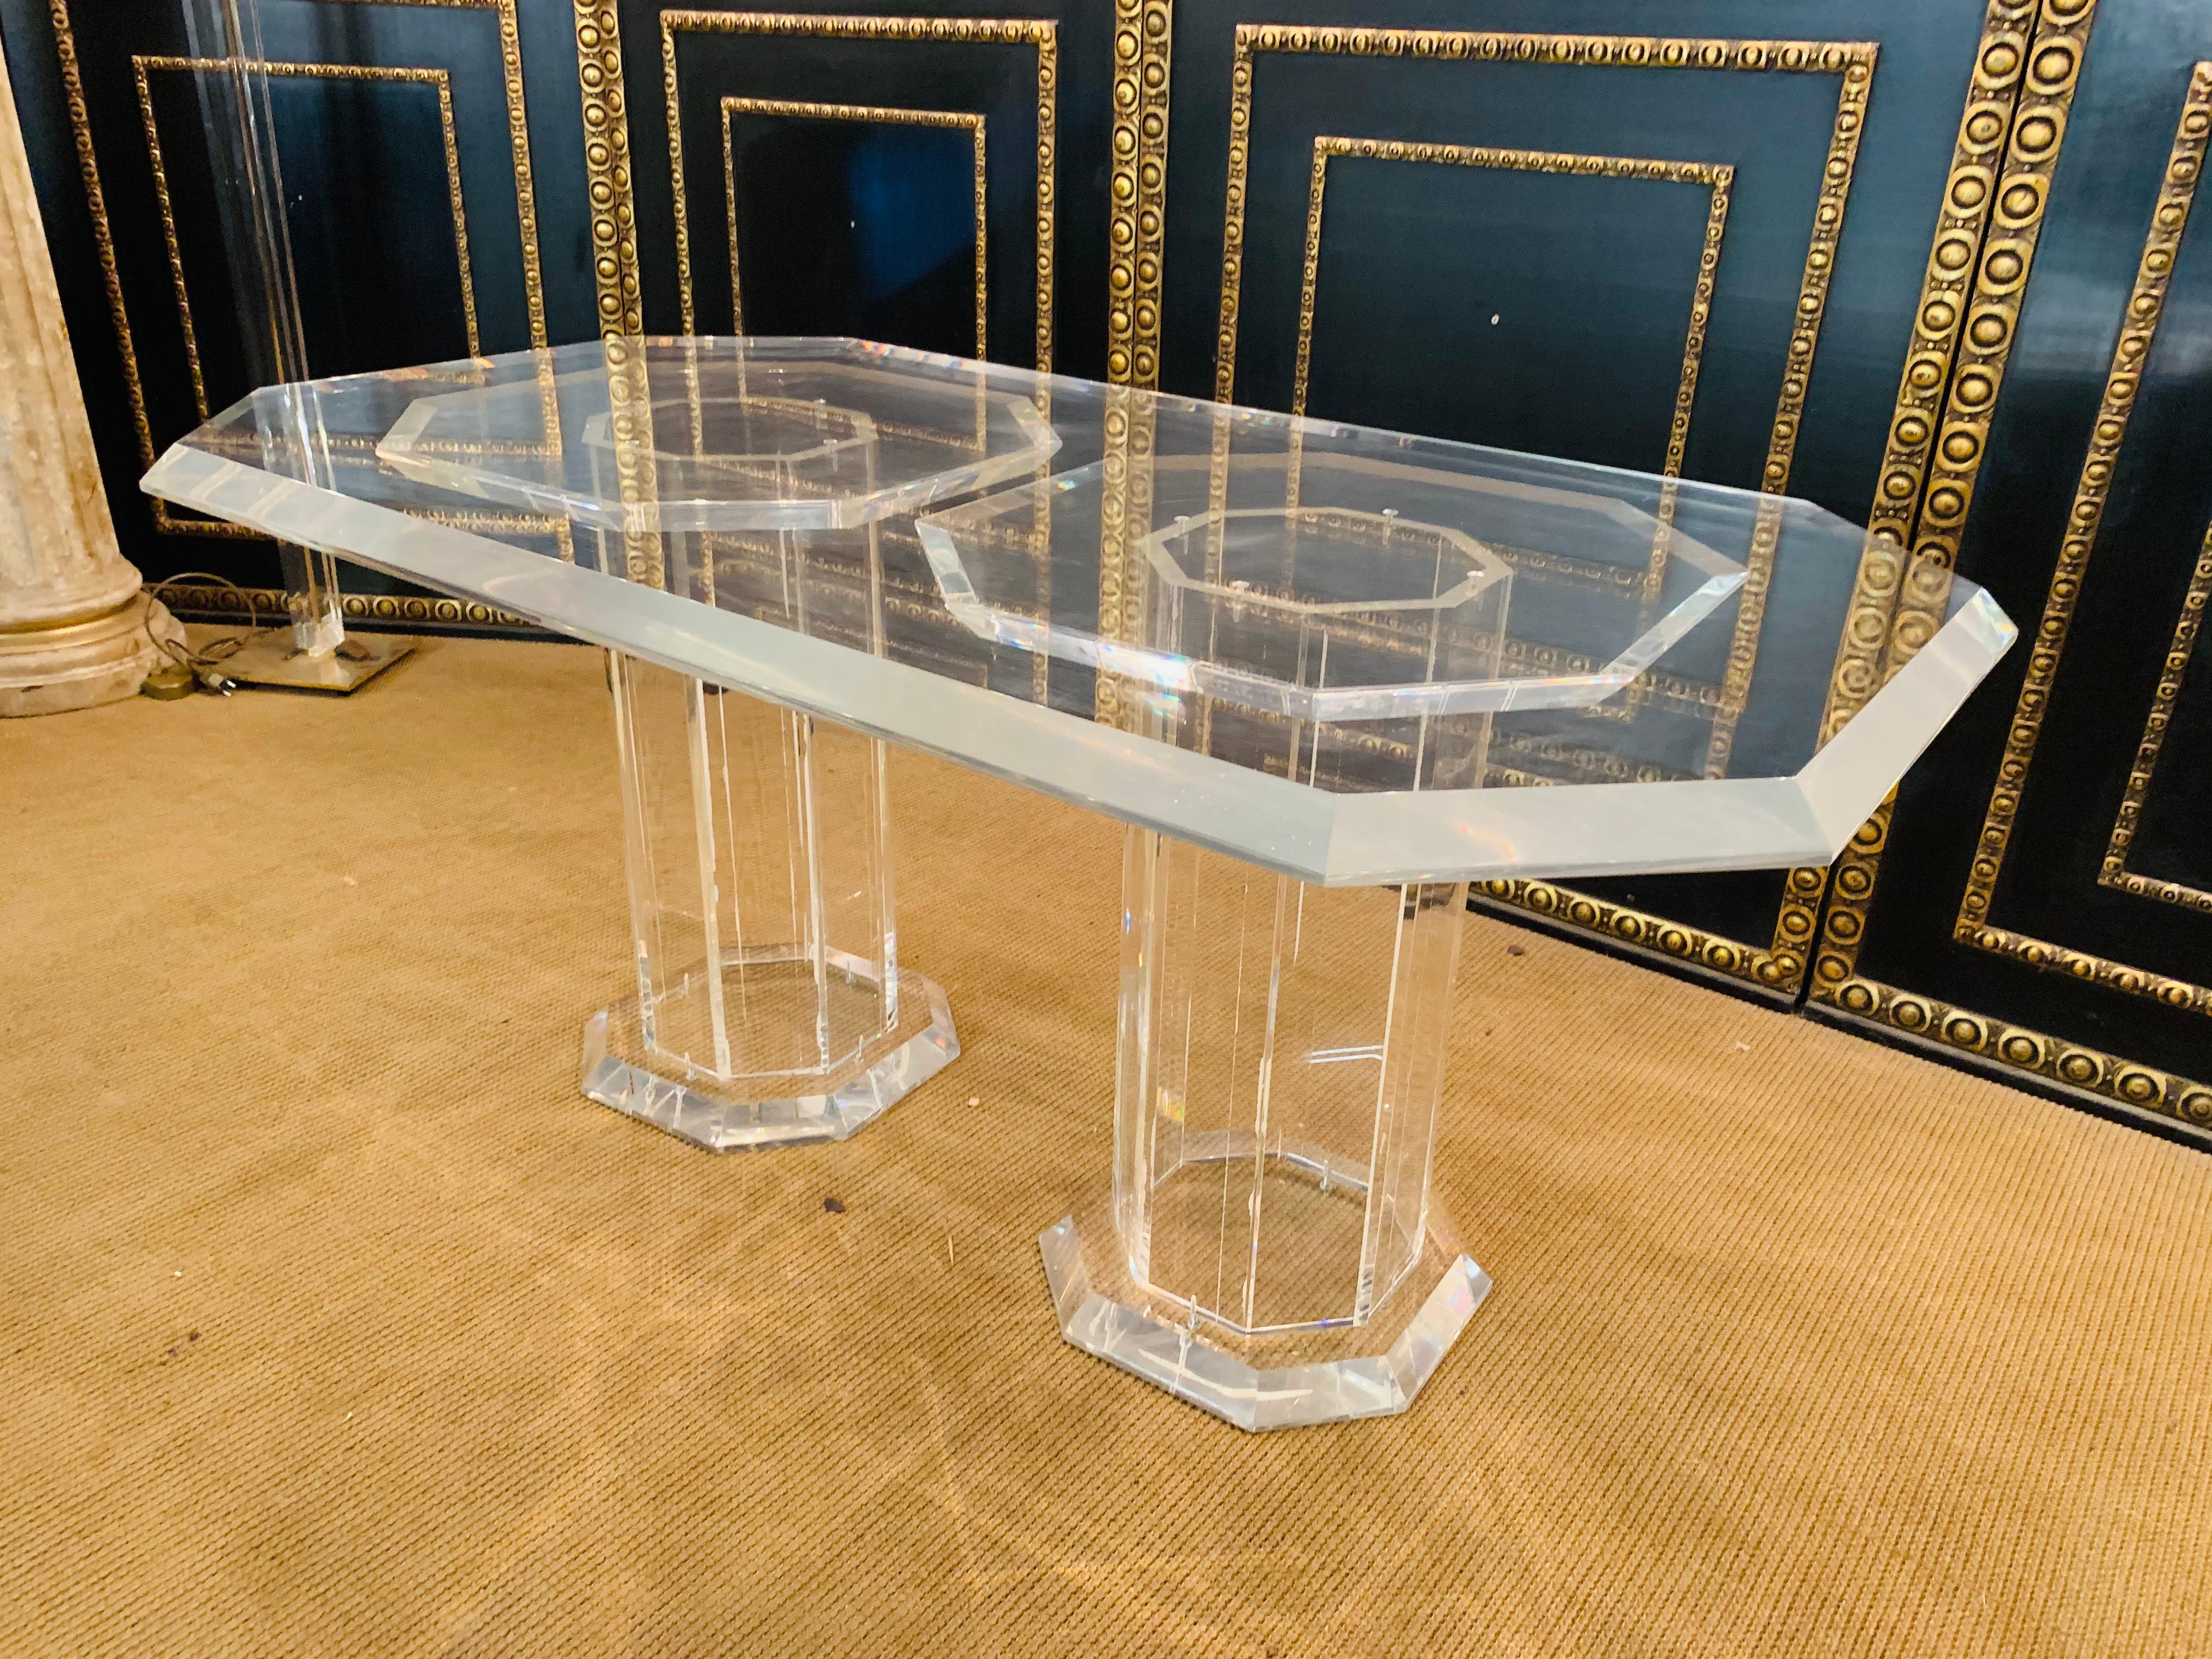 Very High Quality, Elegant, Massive Luxury Dining Table with 2 Columns 8